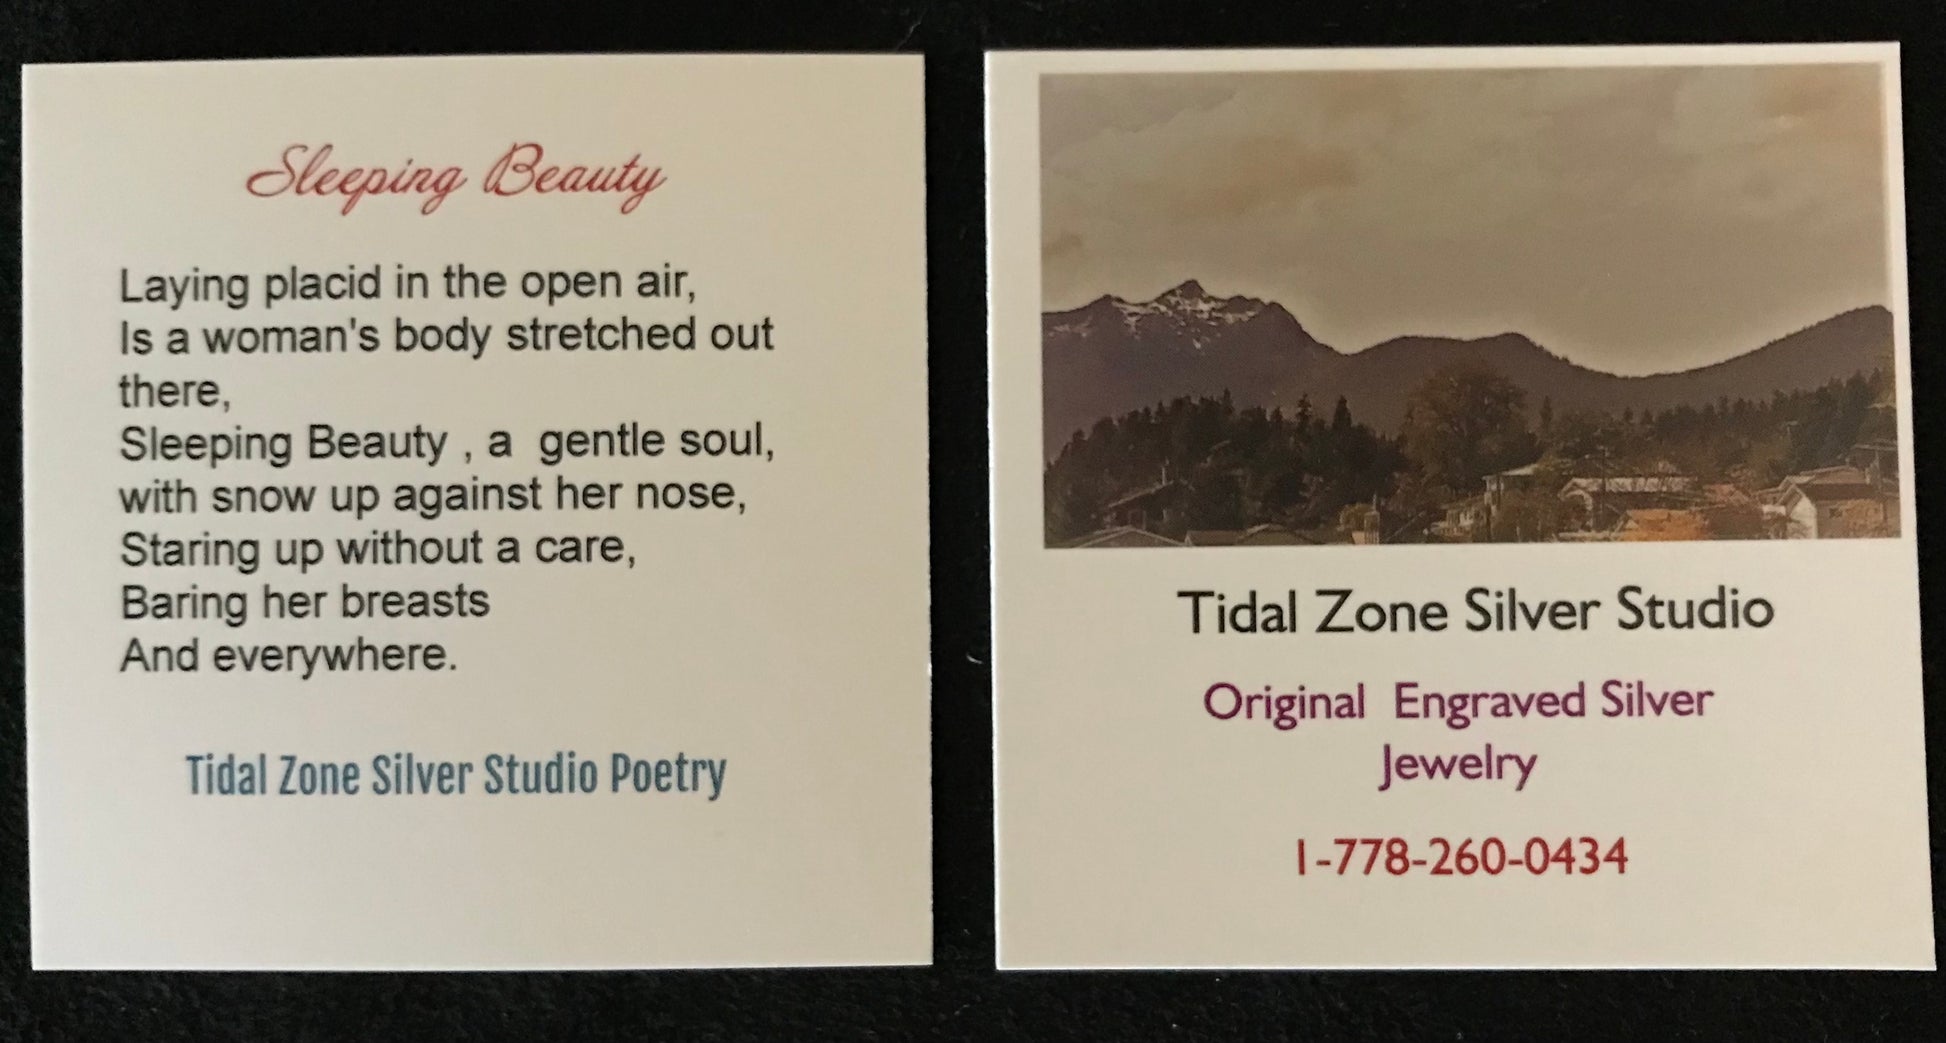 Sleeping Beauty Poetry on Tidal Zone Silver Business card